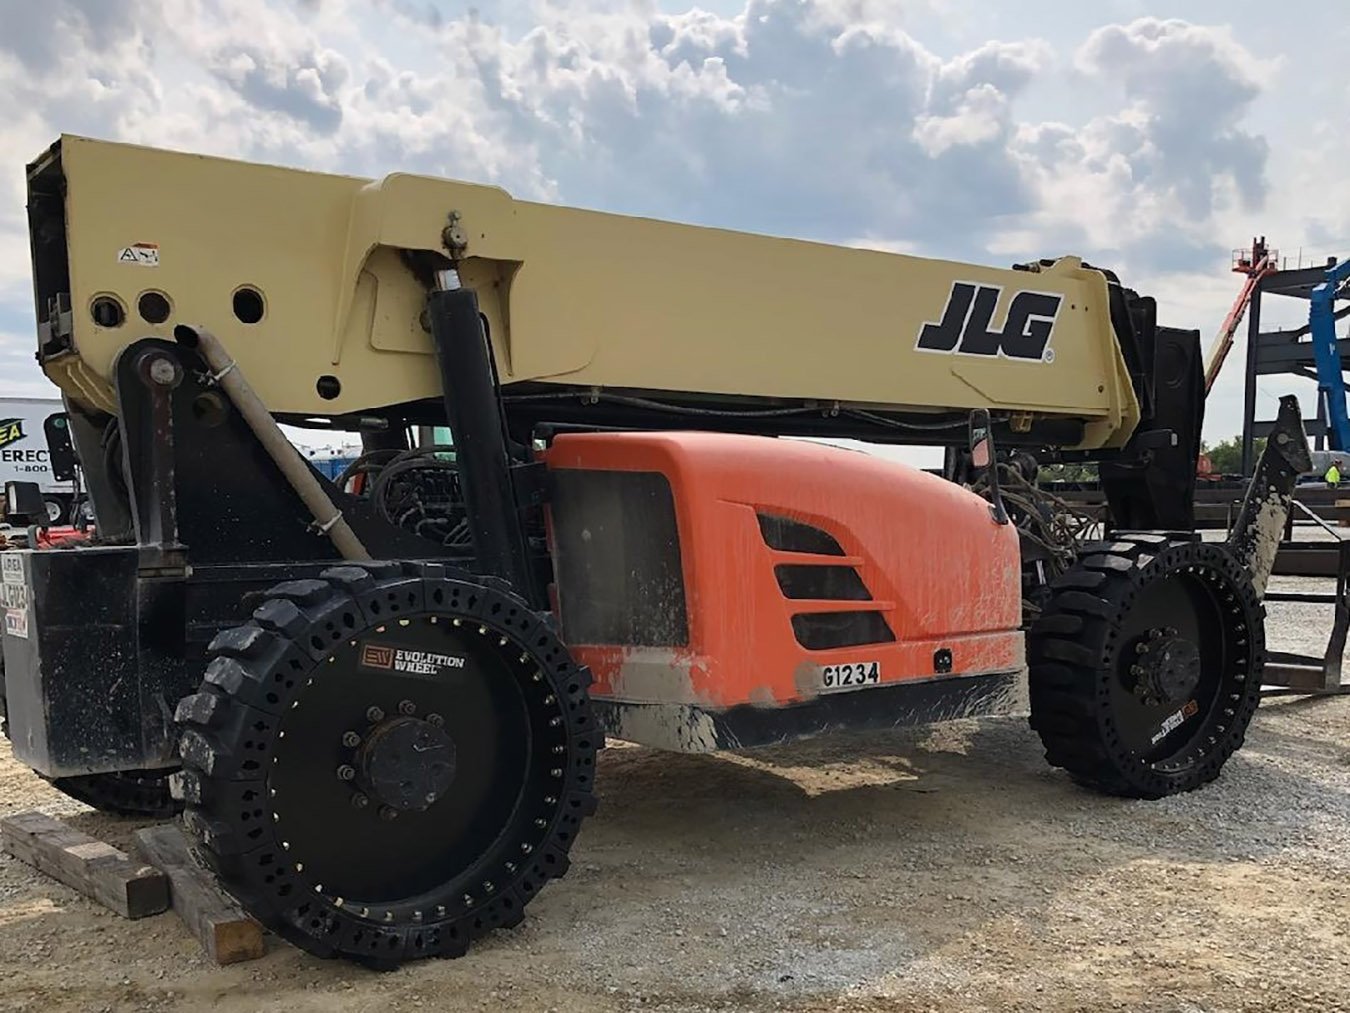 This image shows solid telehandler tires on a JLG telehandler